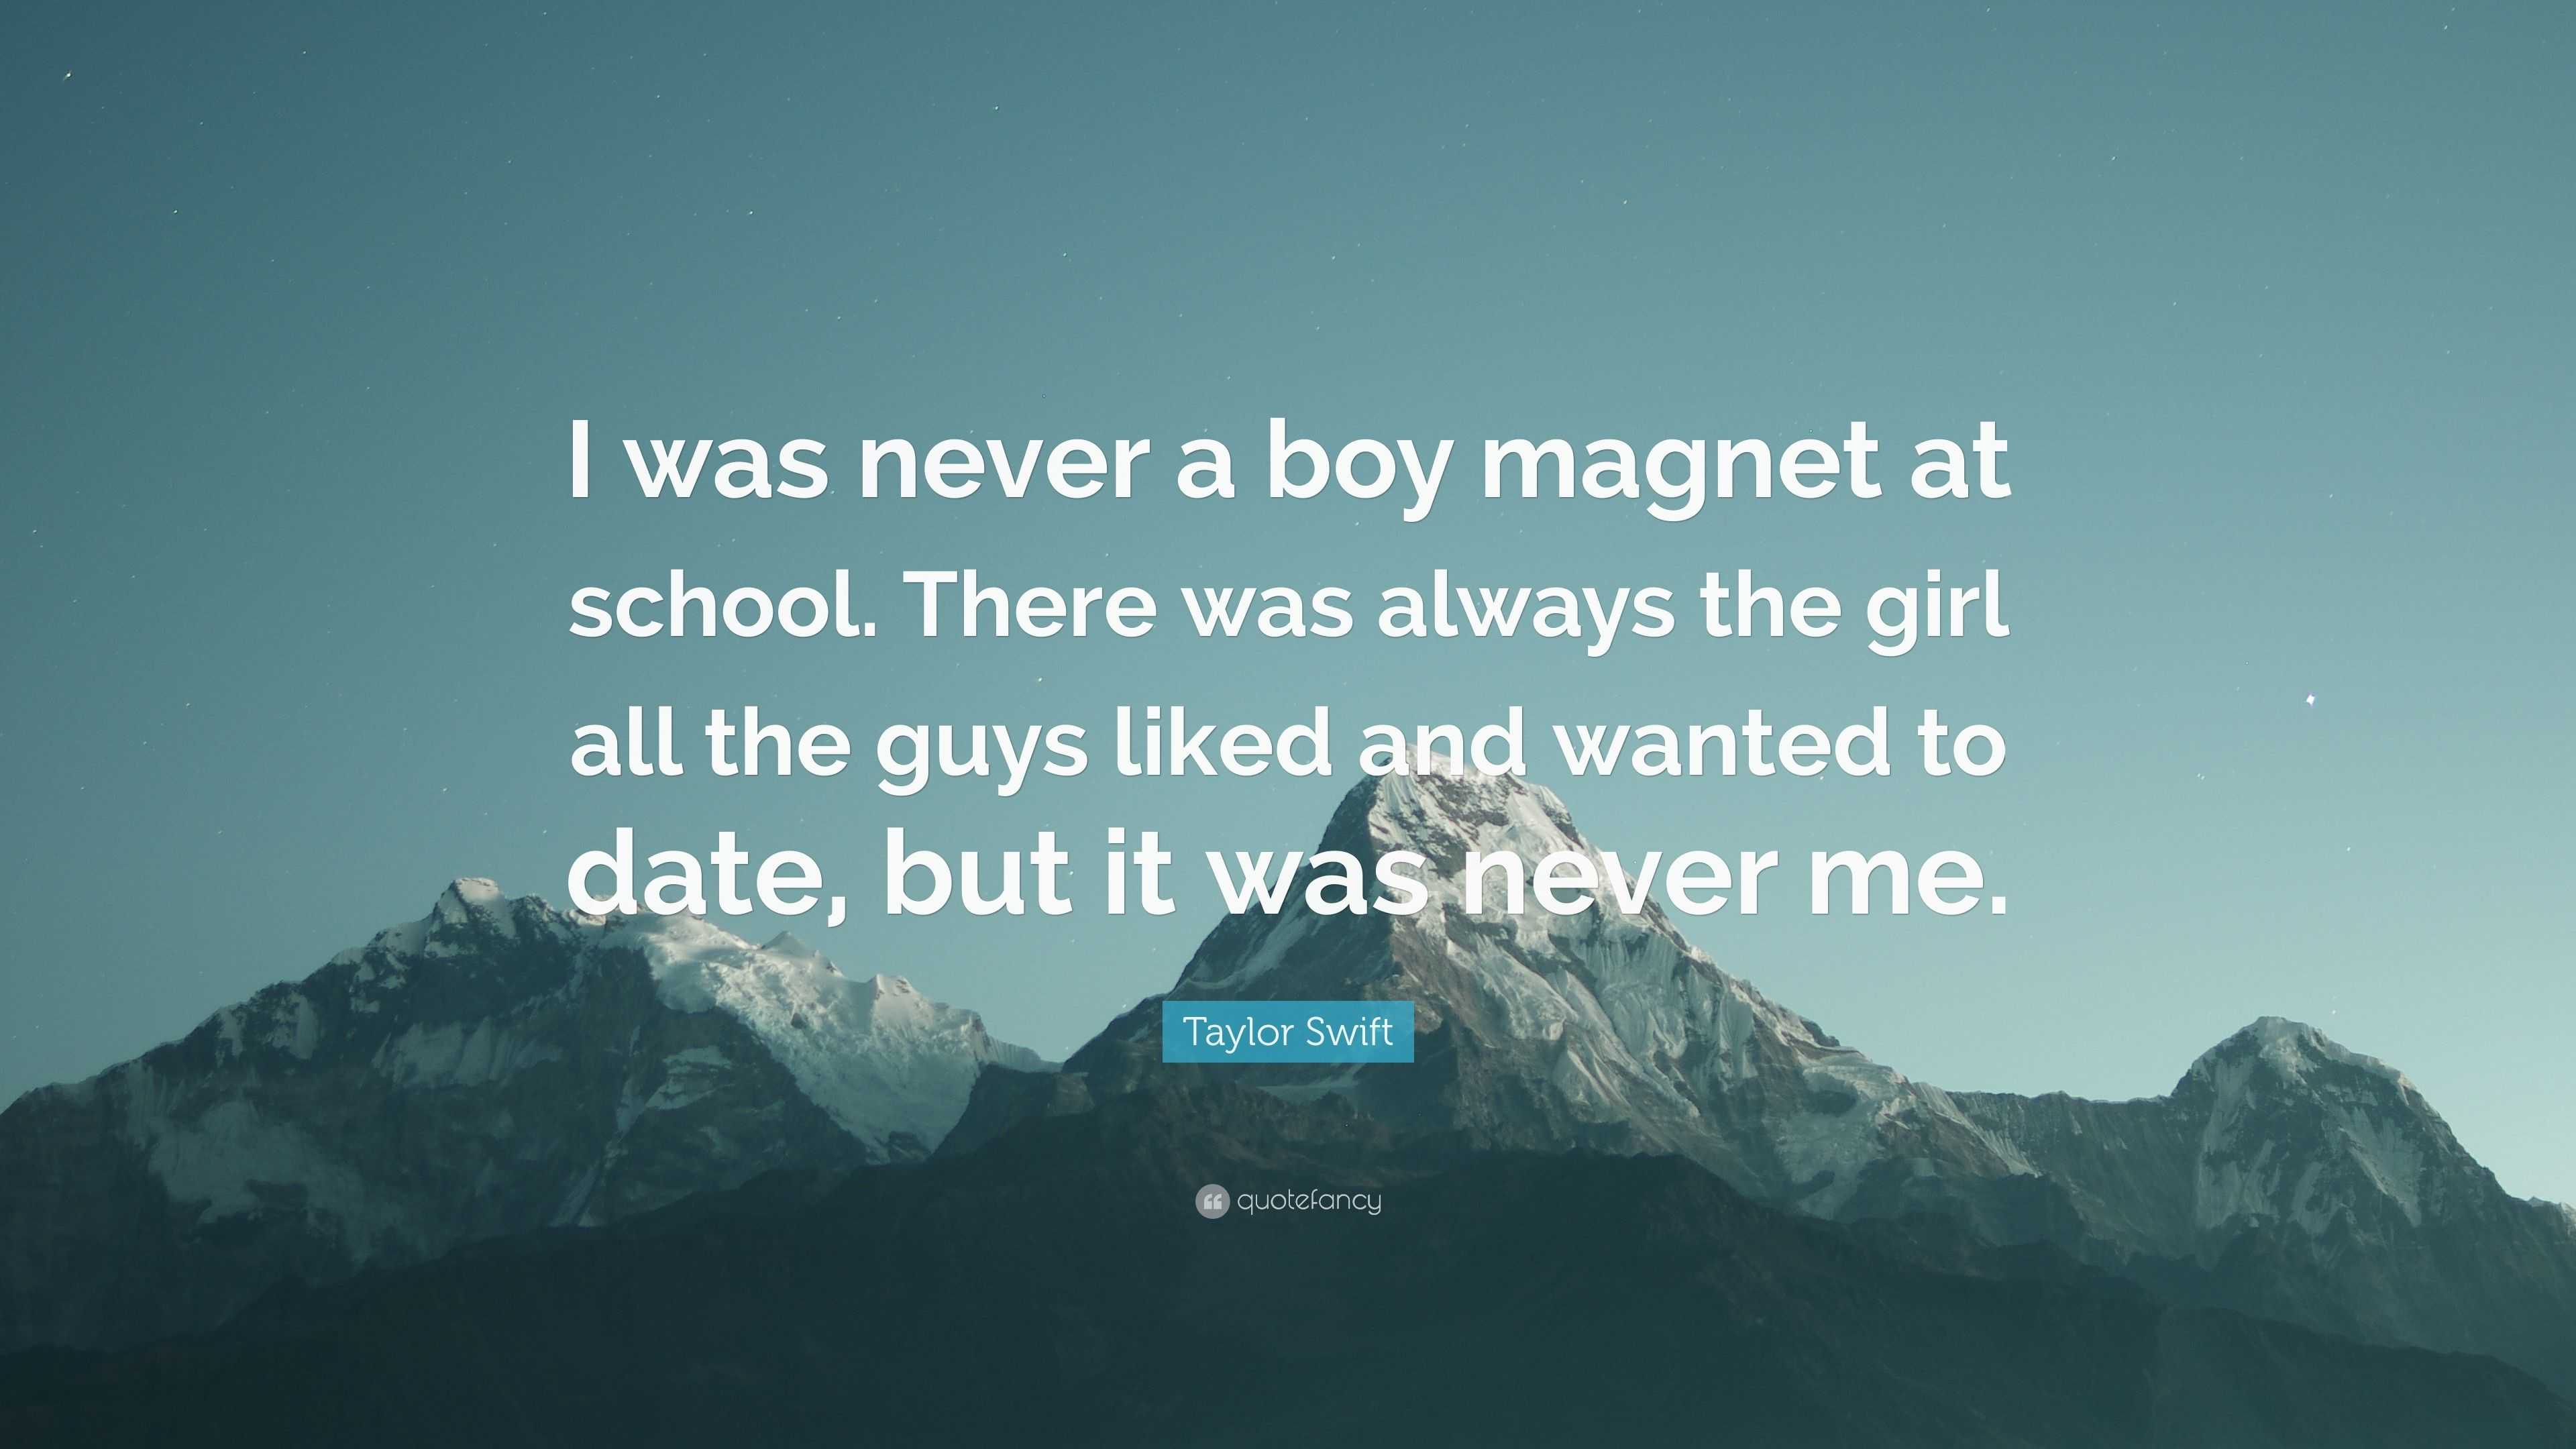 https://quotefancy.com/media/wallpaper/3840x2160/4290997-Taylor-Swift-Quote-I-was-never-a-boy-magnet-at-school-There-was.jpg